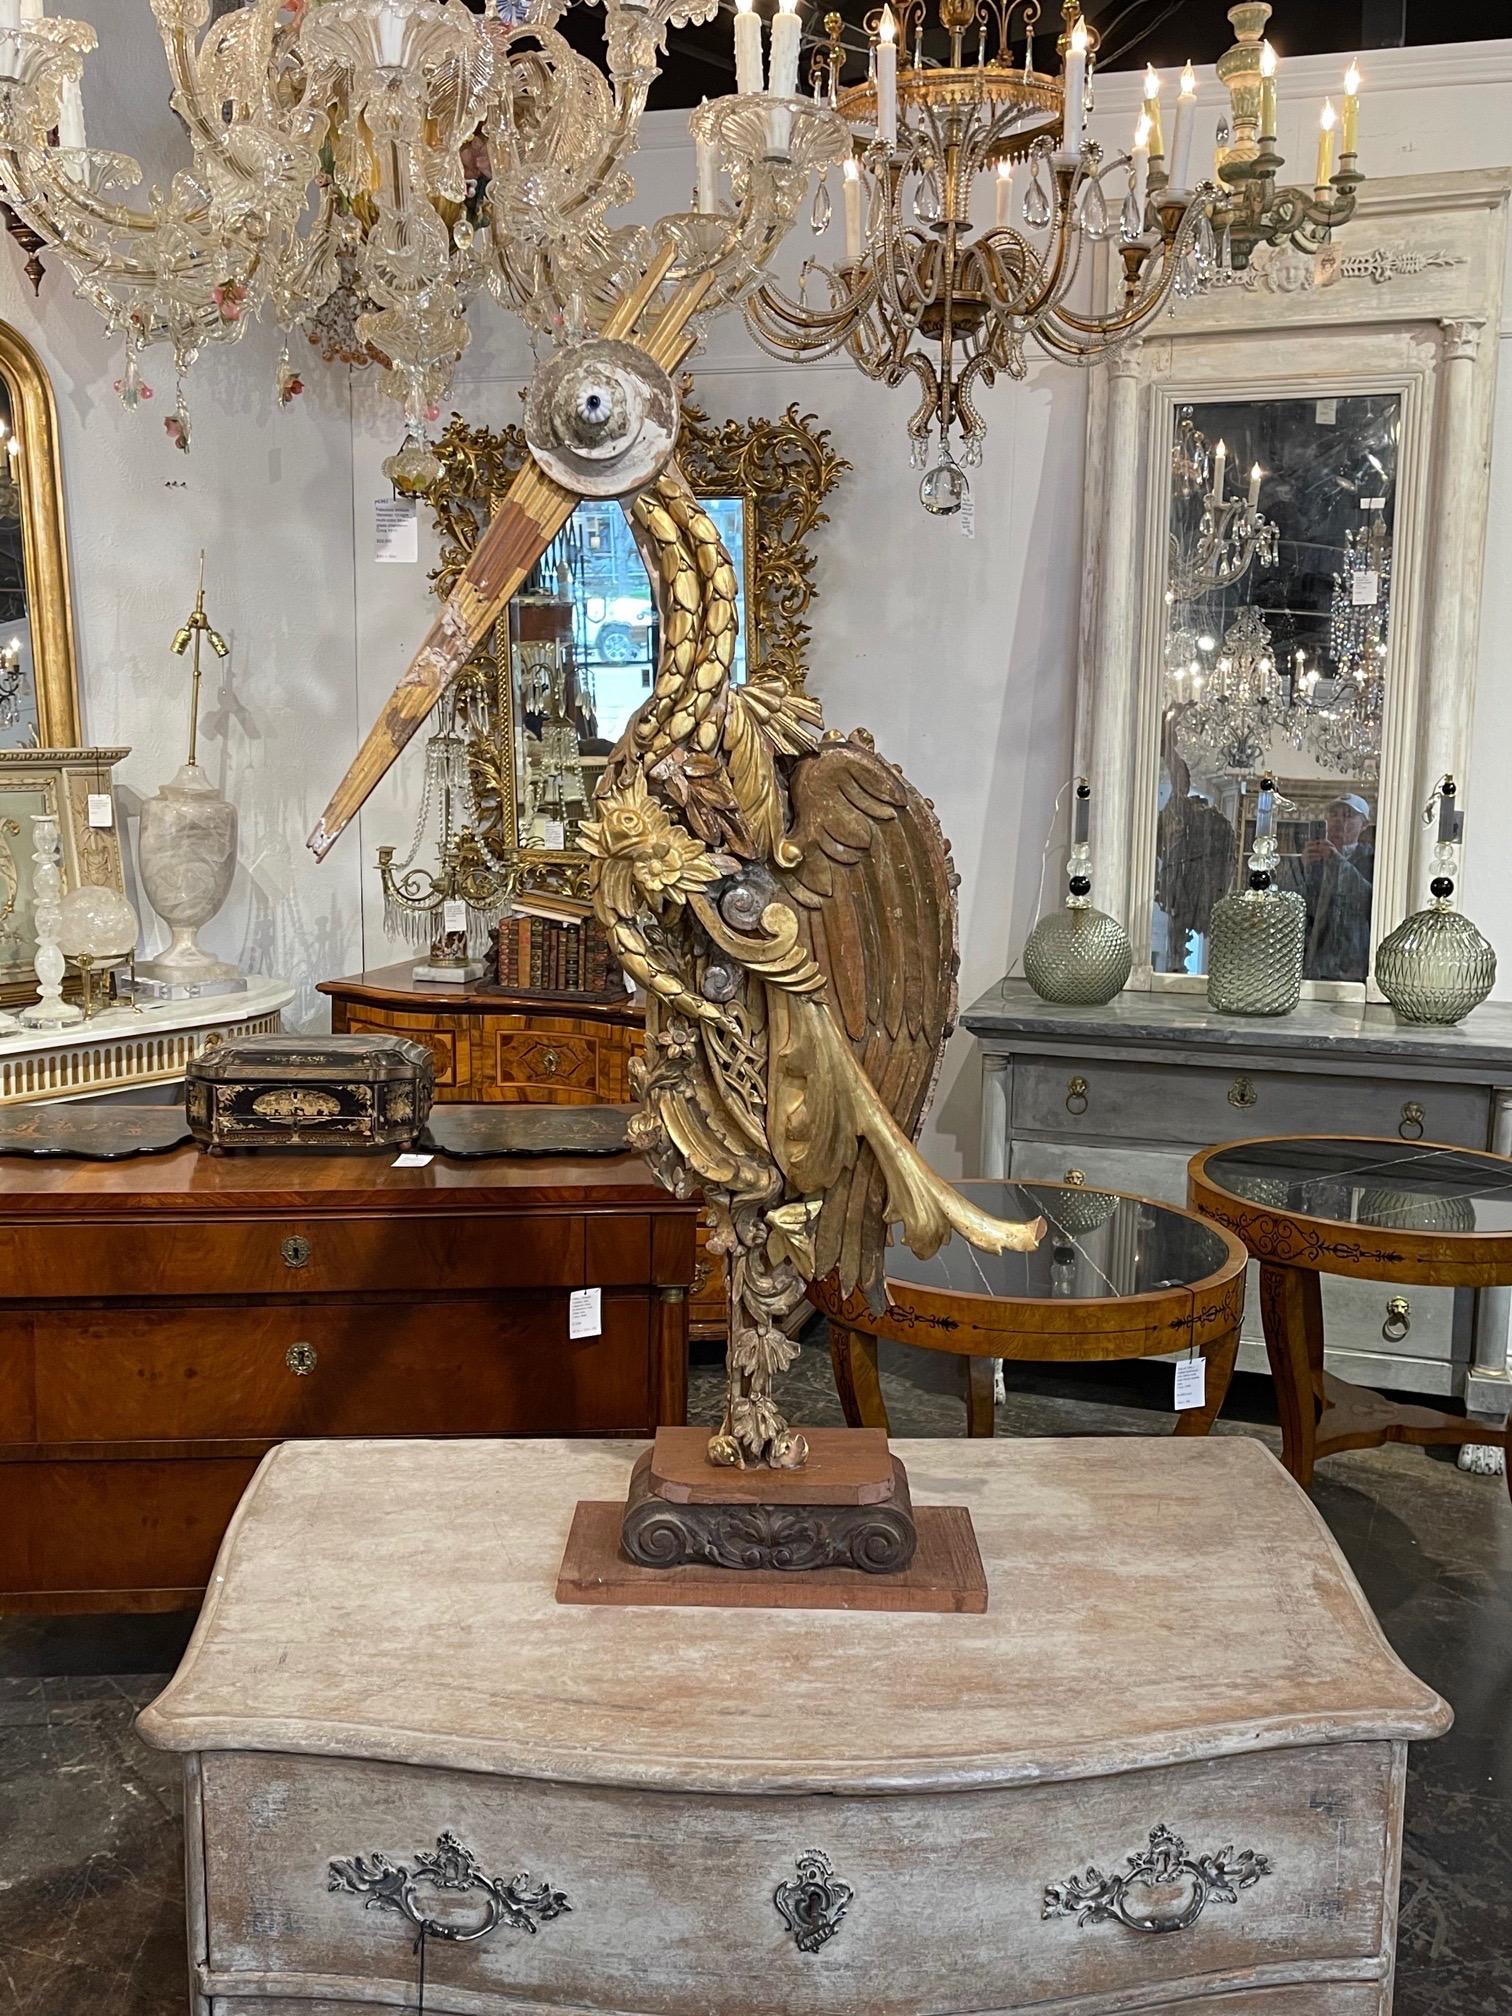 Large scale Italian pelican sculpture made from wood fragments from the 18th and 19th century. Such an interesting piece! A true work of art!